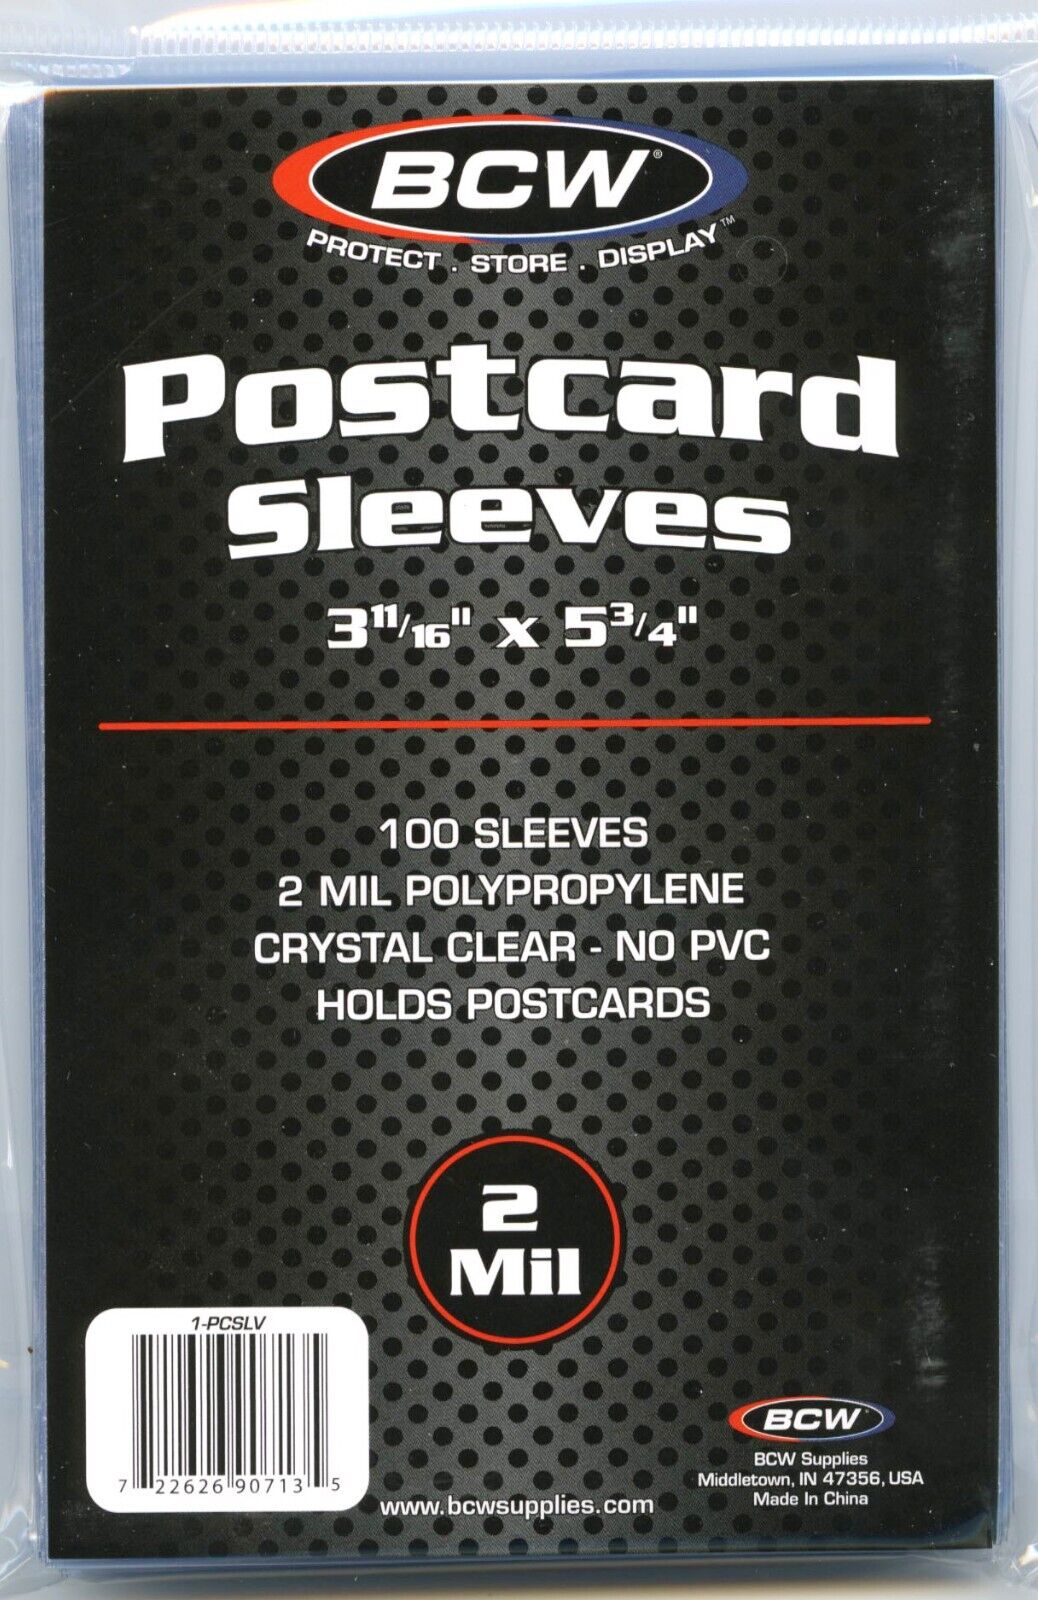 1 Pack Of 100 BCW Archival Standard Size Postcard Sleeves 2 Mil No PVC